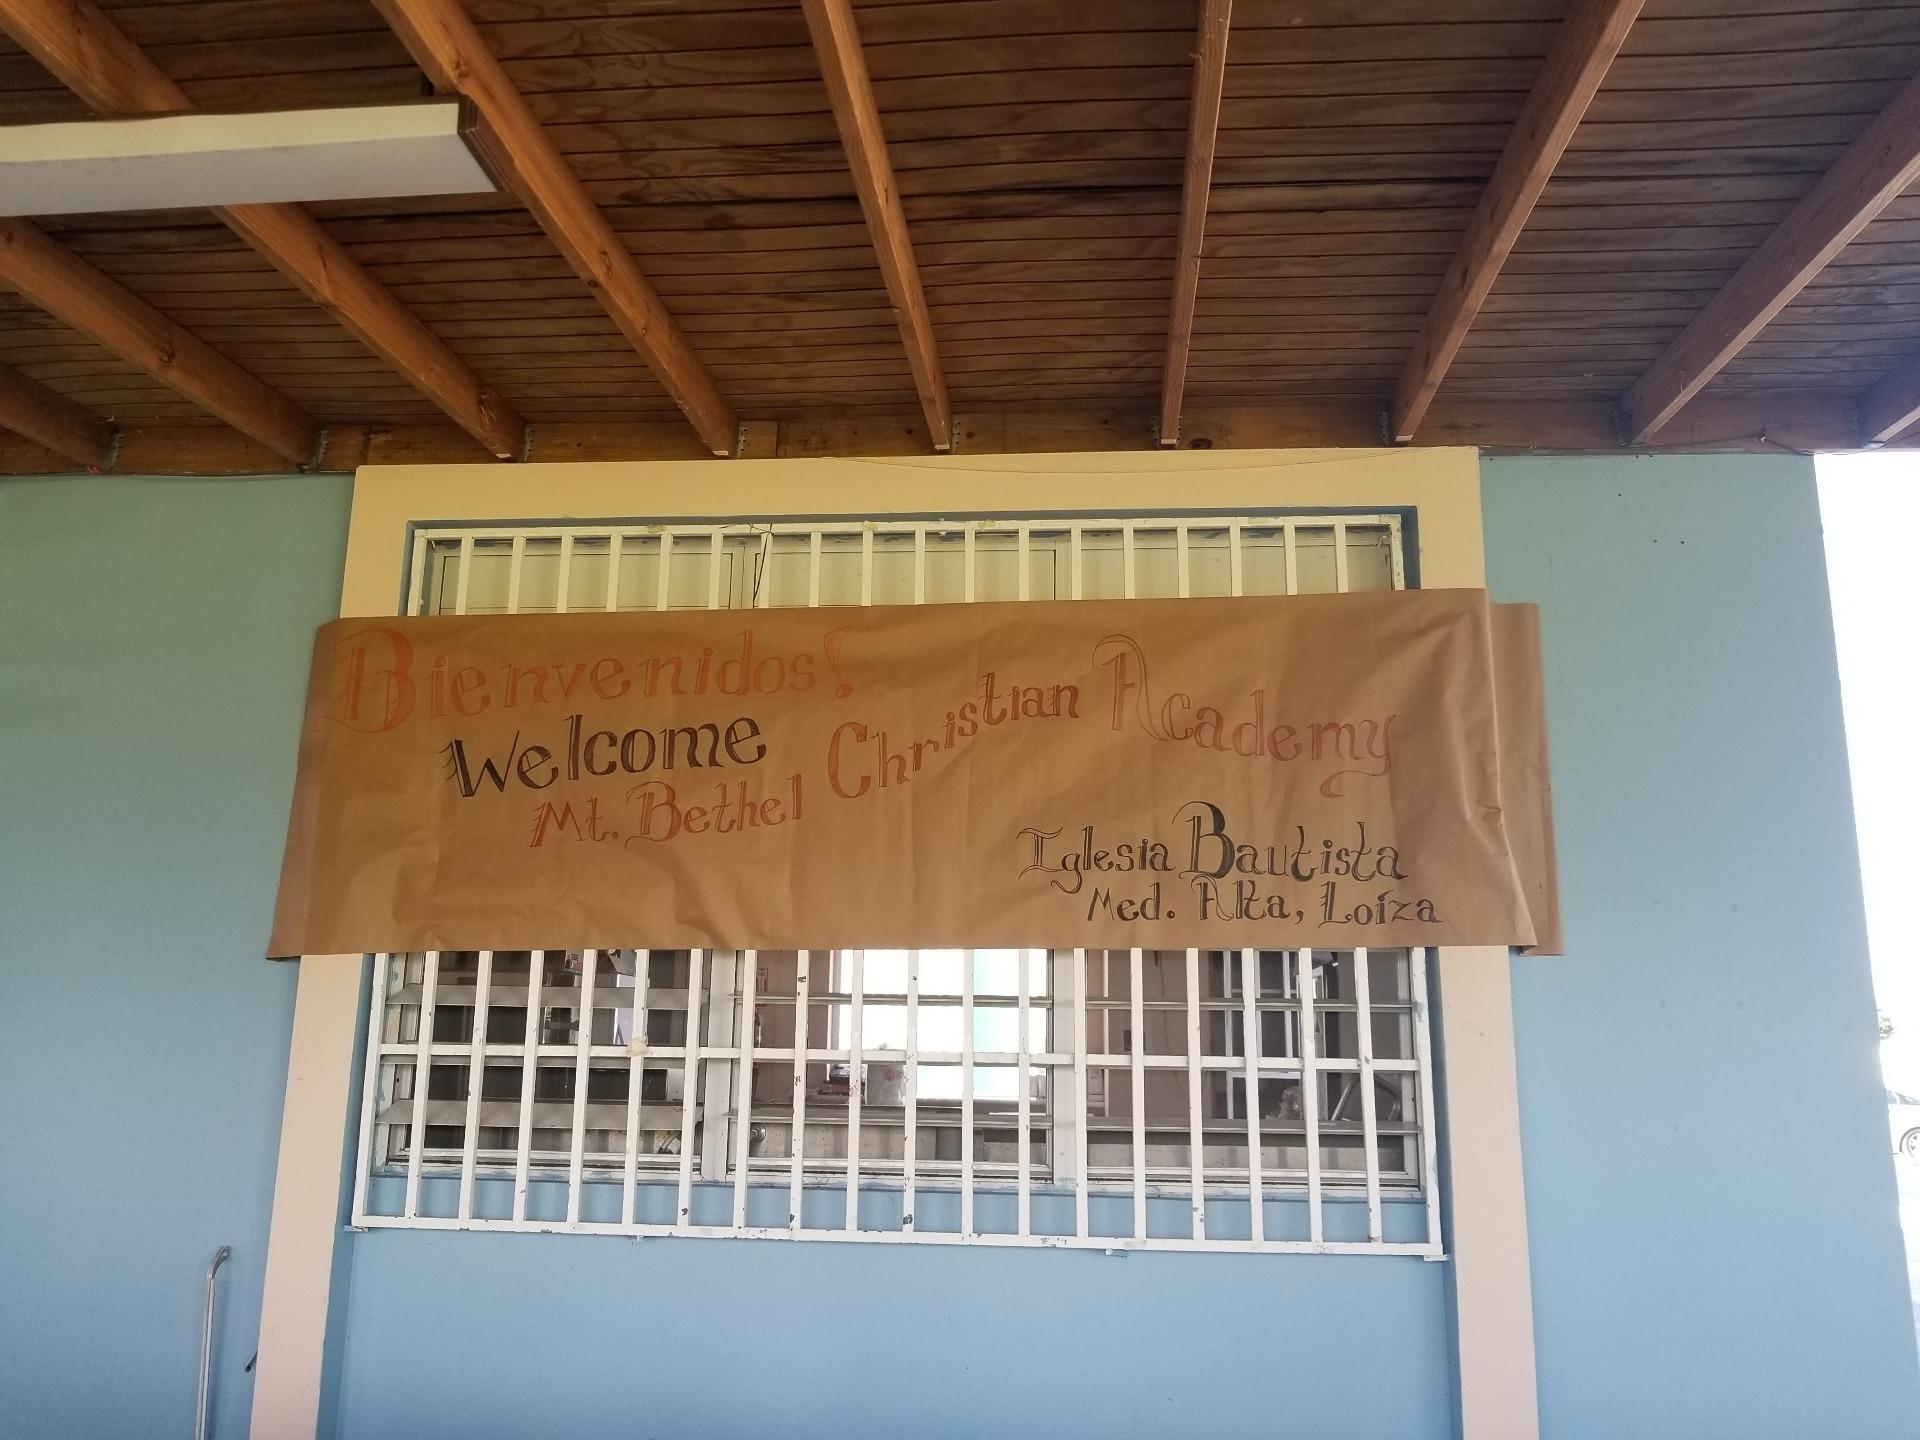 Puerto Ricans are very welcoming!